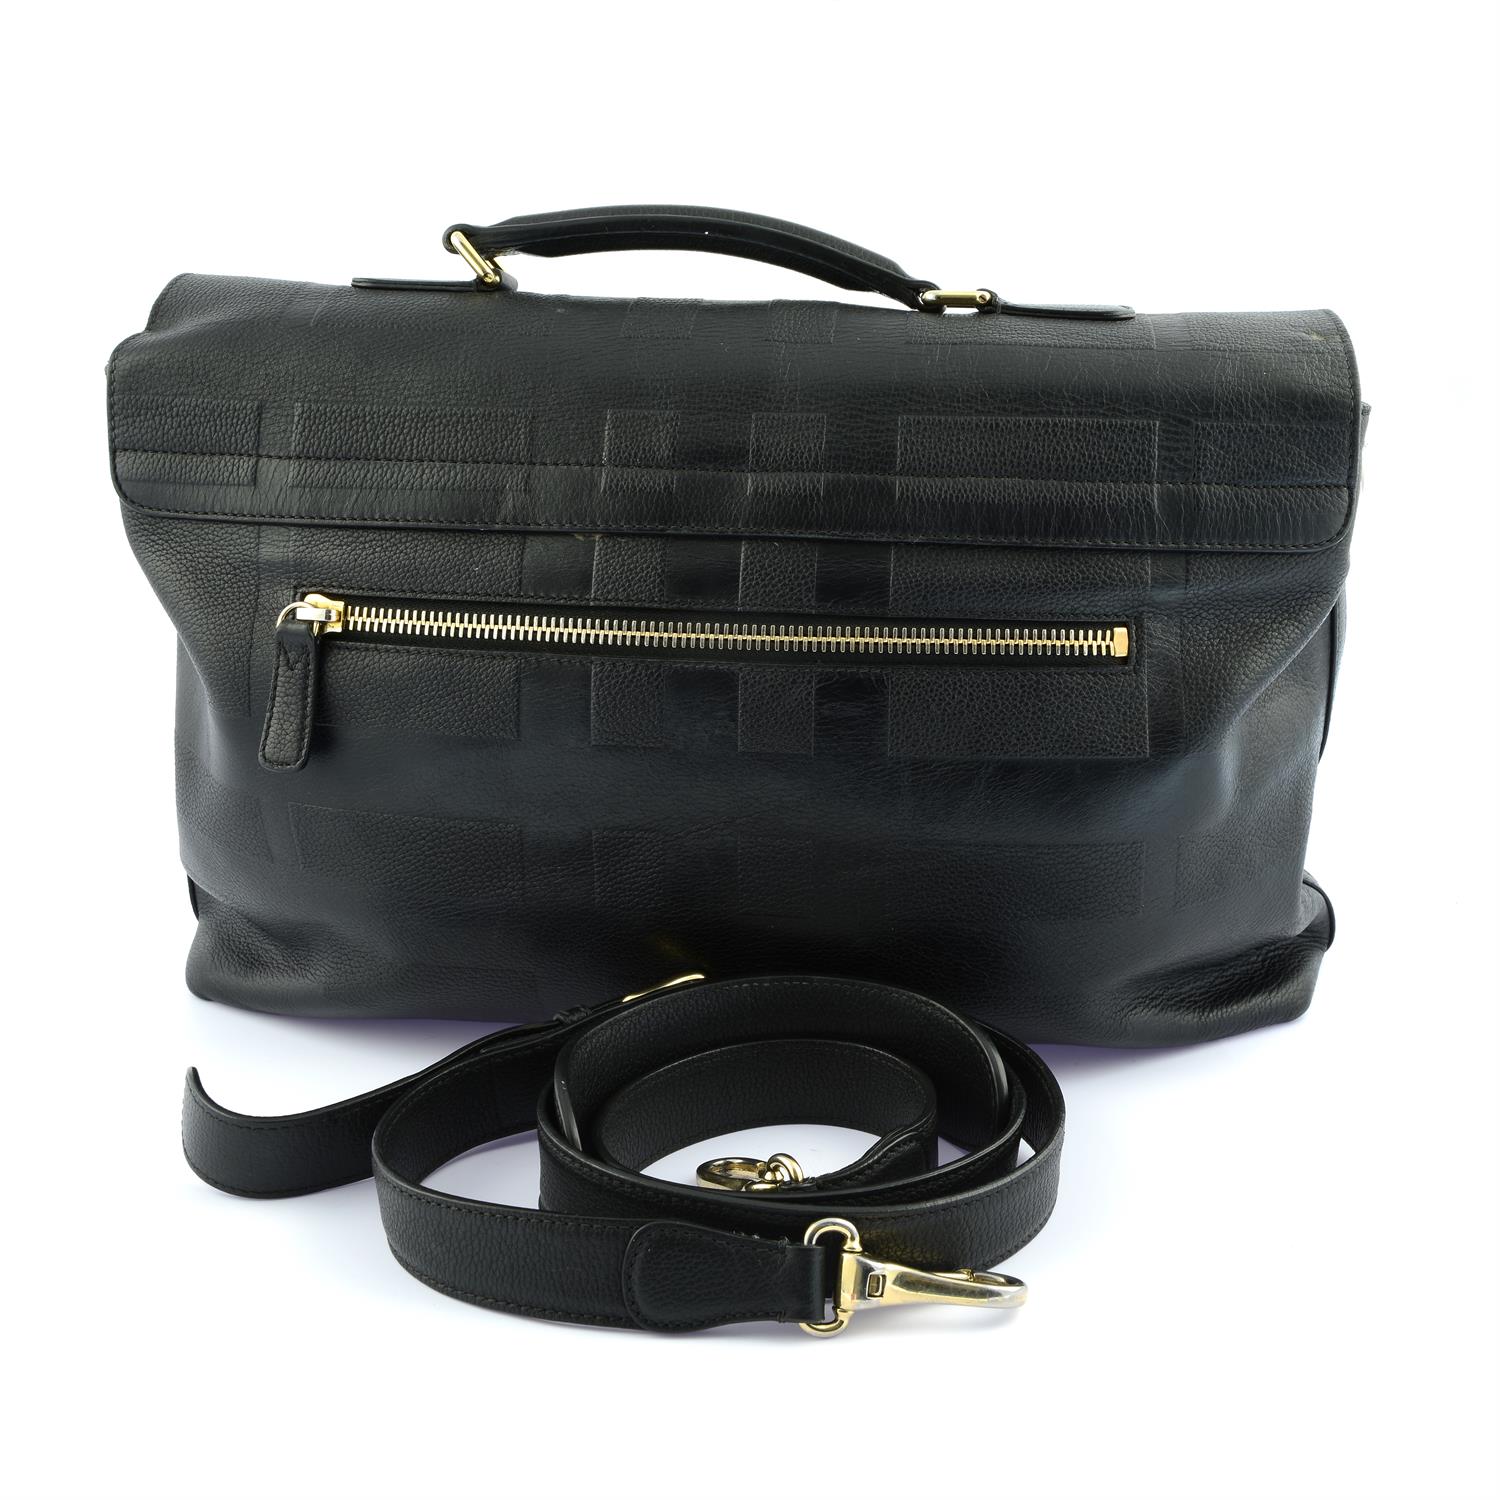 BURBERRY - a black embossed leather satchel. - Image 2 of 4